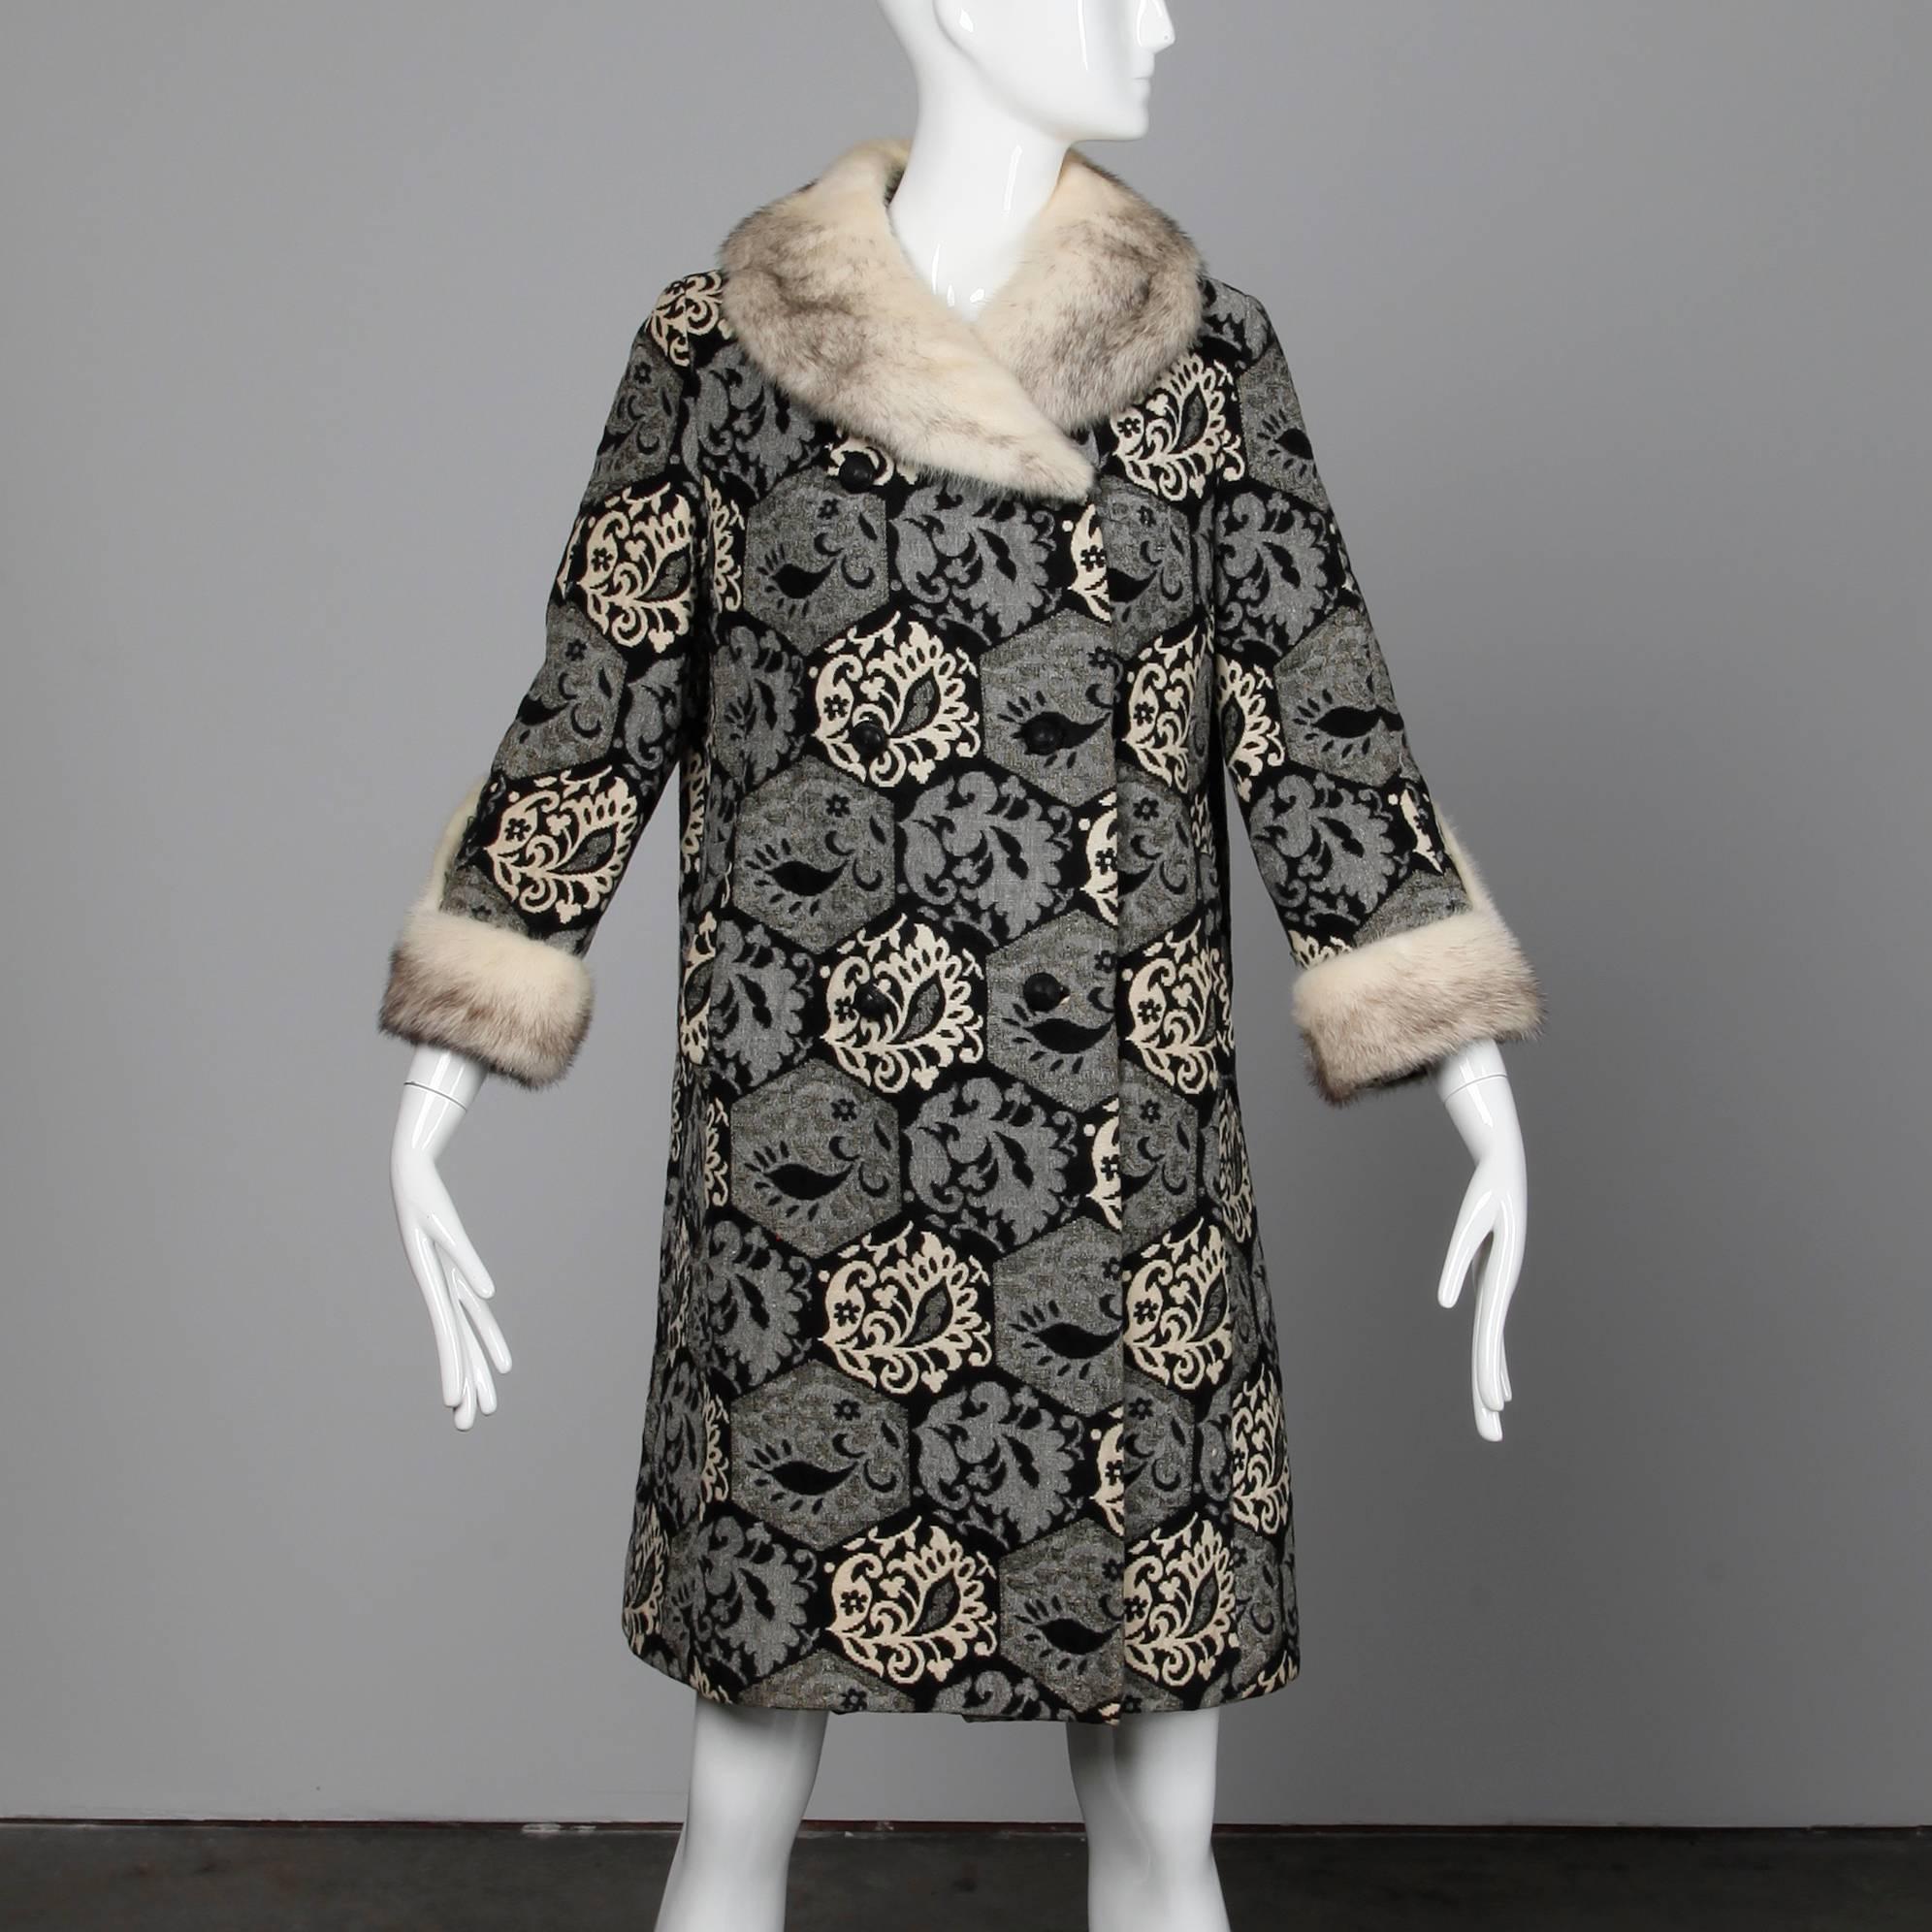 Gorgeous vintage wool tapestry coat with cross mink fur collar and cuffs by Evans. Fully lined with front button and snap closure. Hidden side pockets. Fits like a size small-medium. The bust measures 40", waist 40", hips 46",